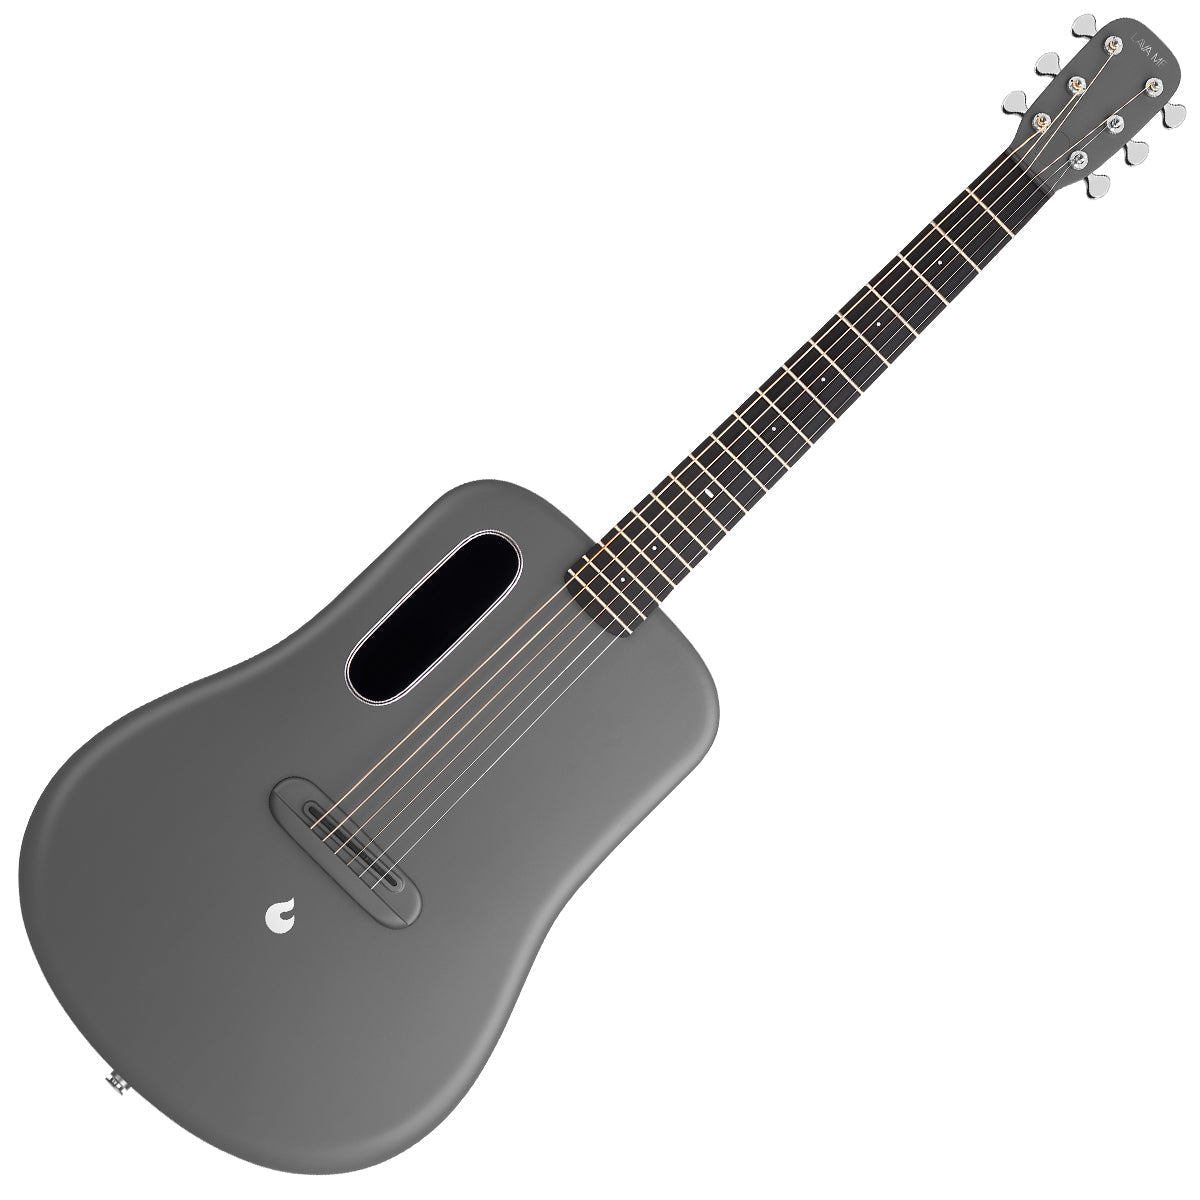 LAVA ME4 Carbon 38" with AirFlow Bag ~ Space Grey, Acoustic Guitar for sale at Richards Guitars.